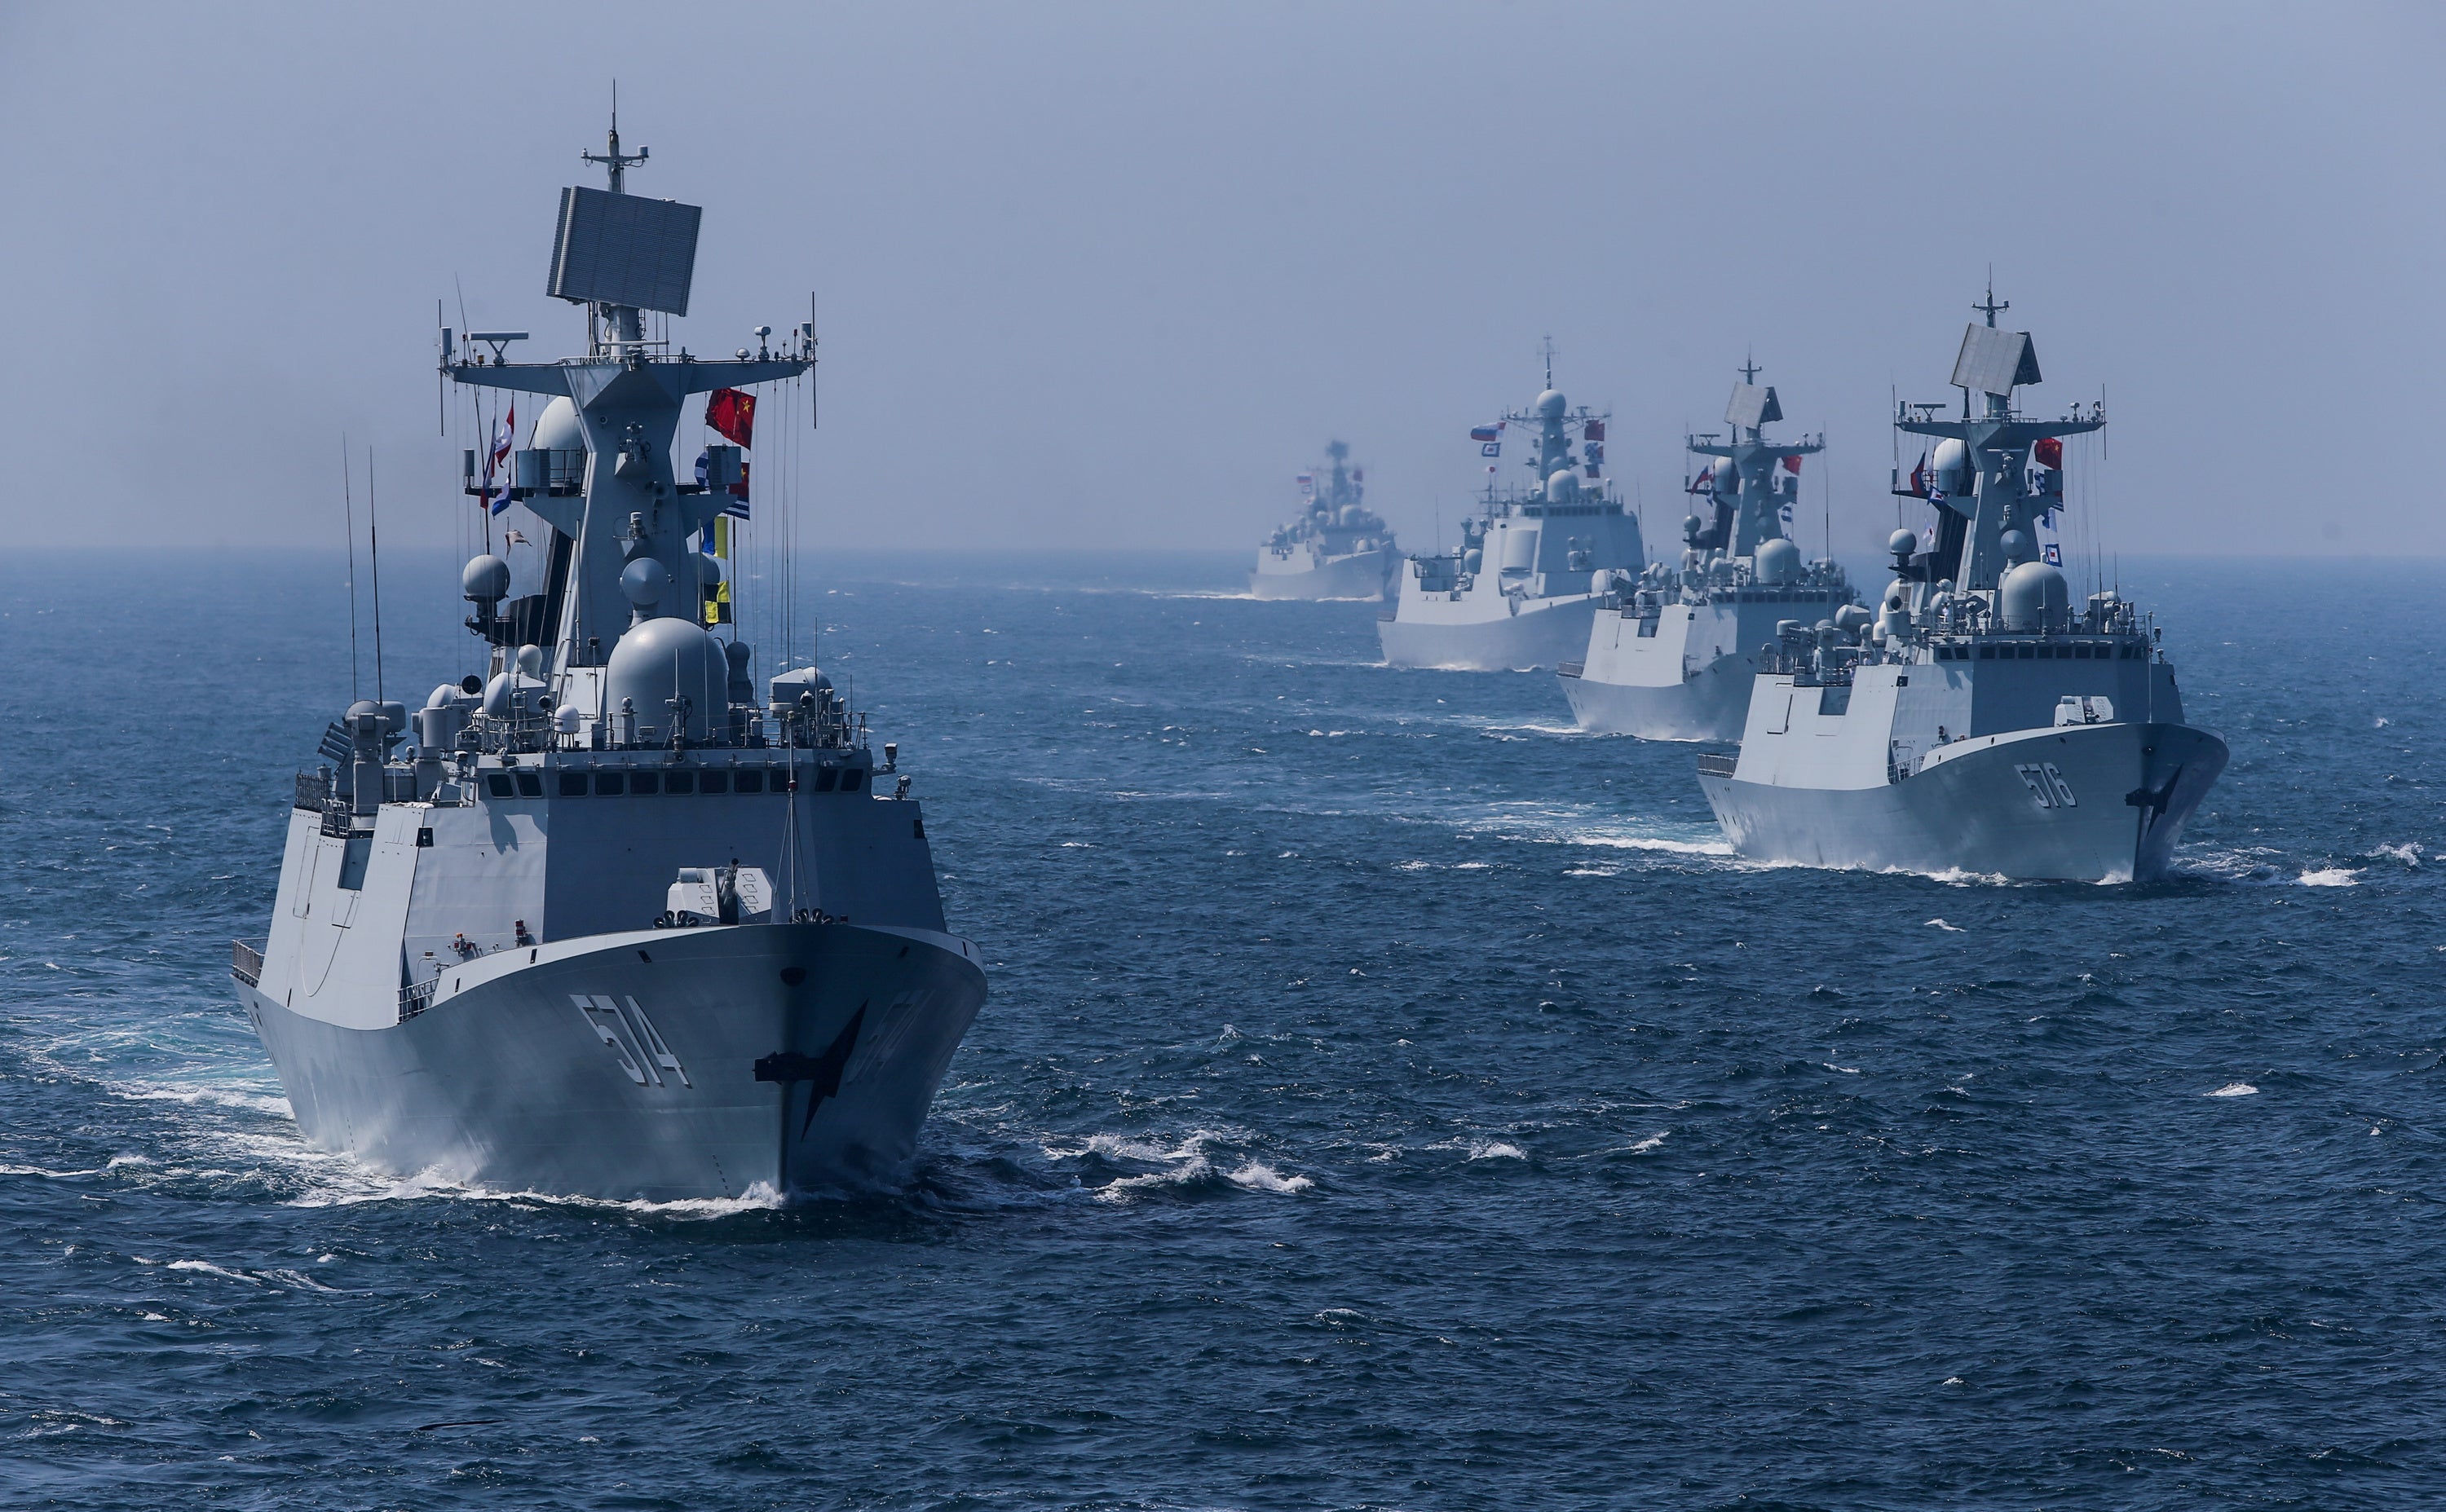 A fleet of ships sail out at sea as China and Russia's naval joint drill concludes in Zhanjiang, Guangdong Province, China